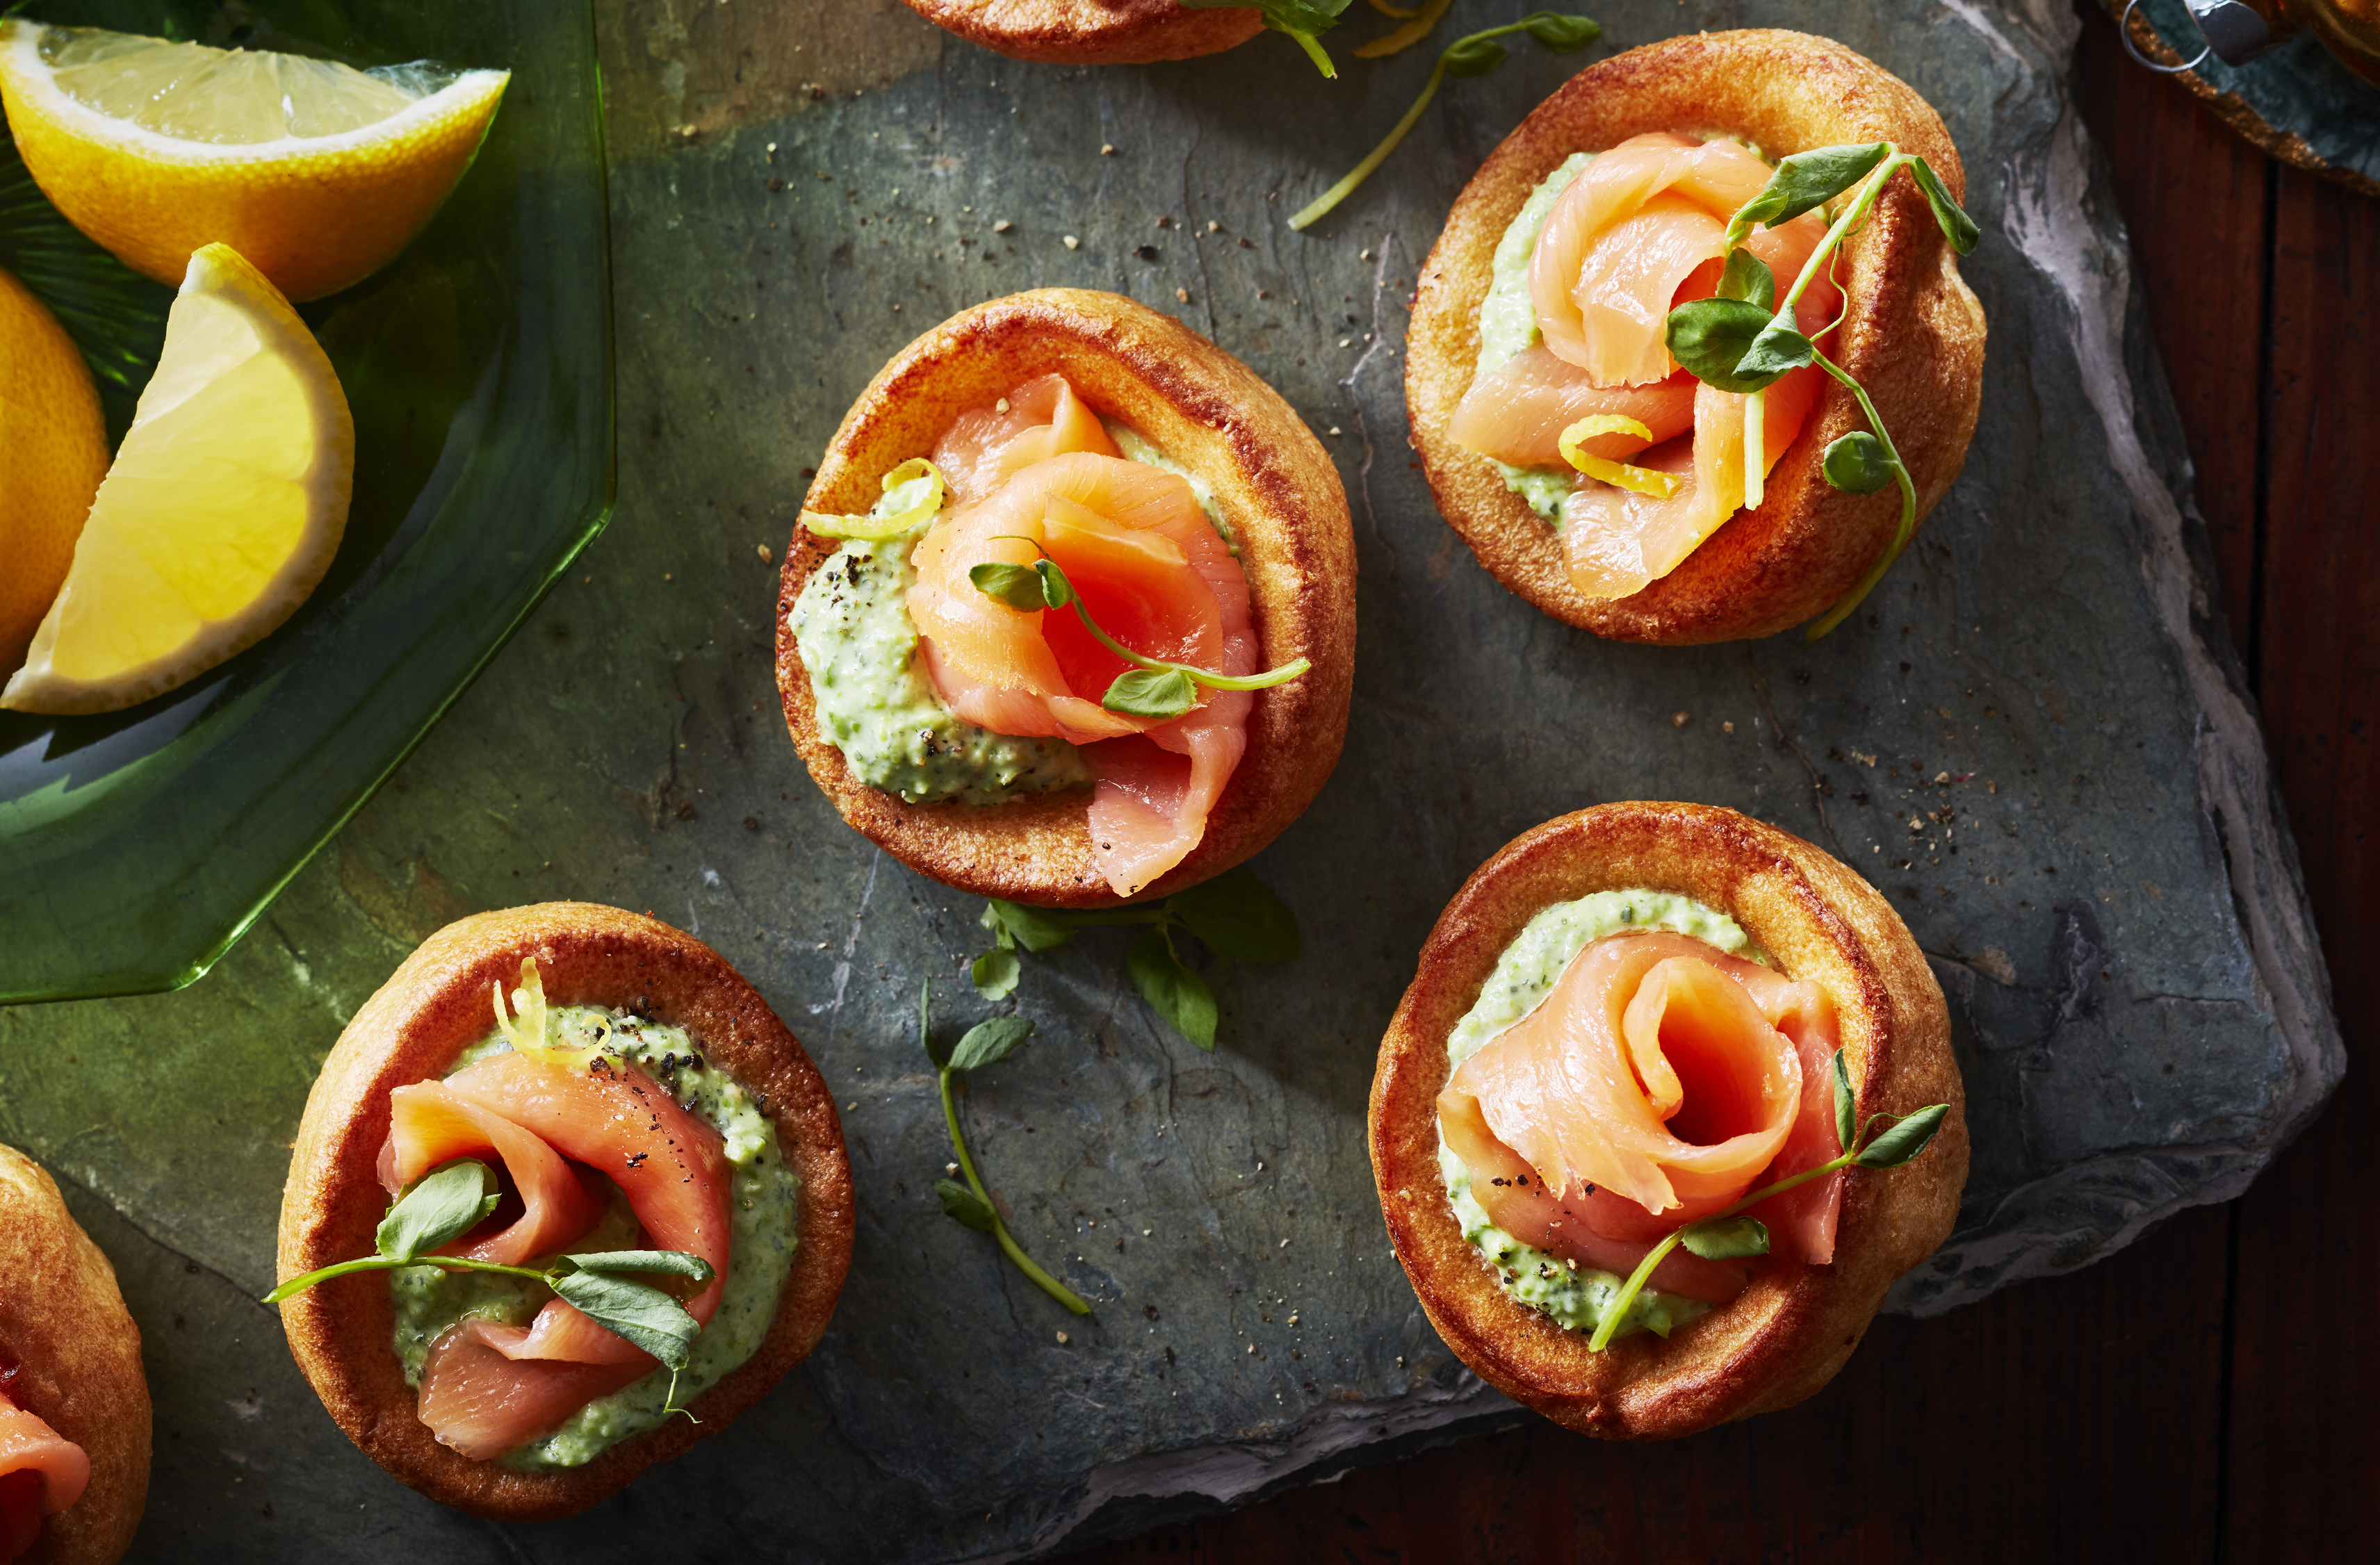 Lemon wedges stand beside smoked salmon rosettes on baked pastry rounds
